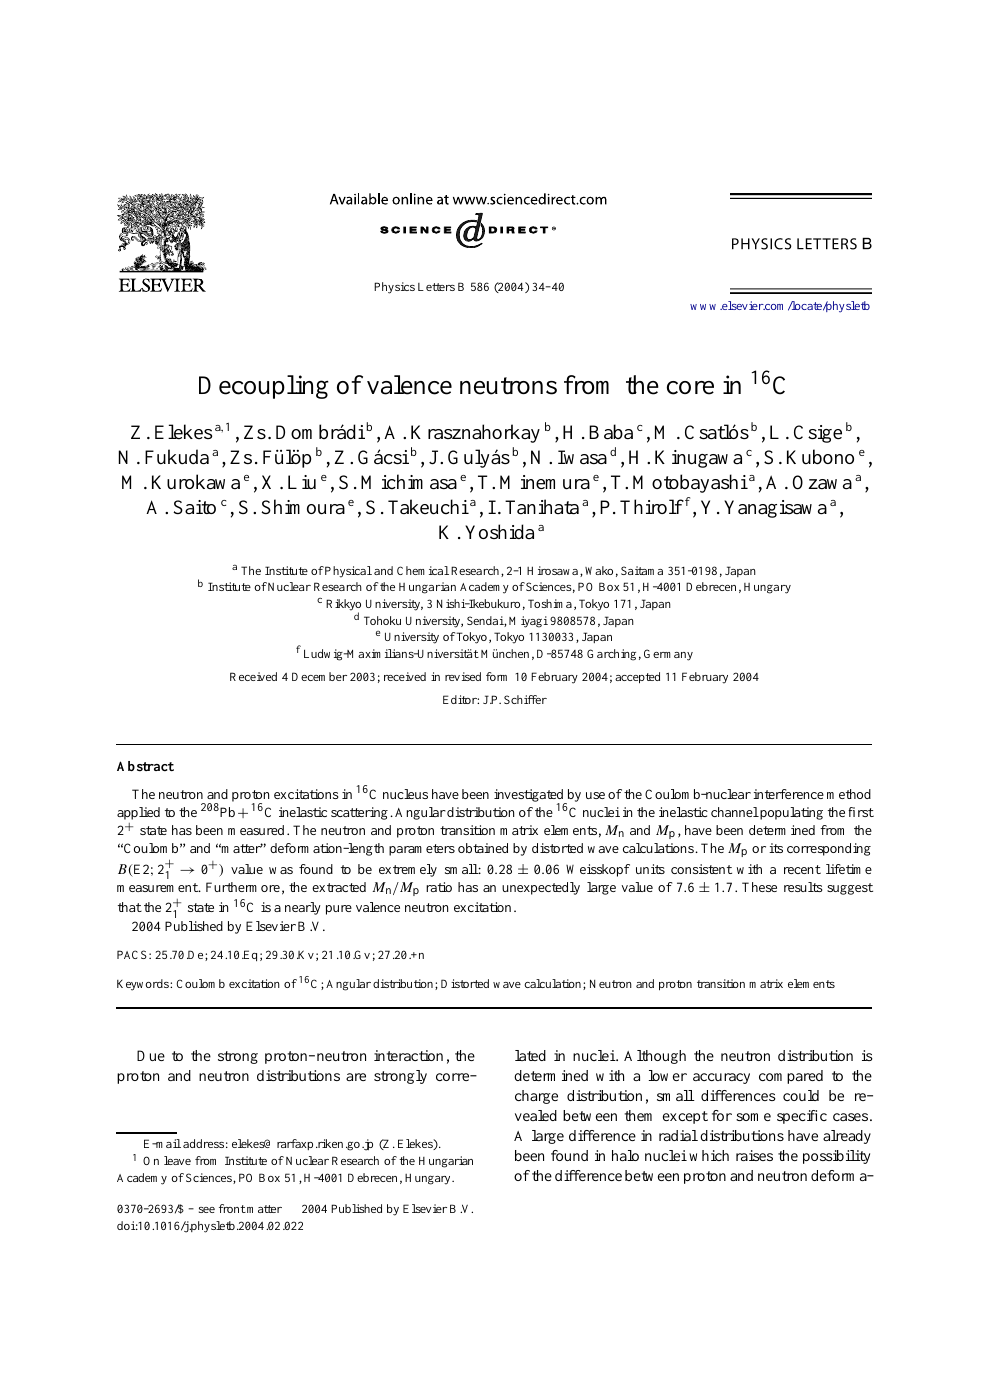 Decoupling Of Valence Neutrons From The Core In 16c Topic Of Research Paper In Physical Sciences Download Scholarly Article Pdf And Read For Free On Cyberleninka Open Science Hub